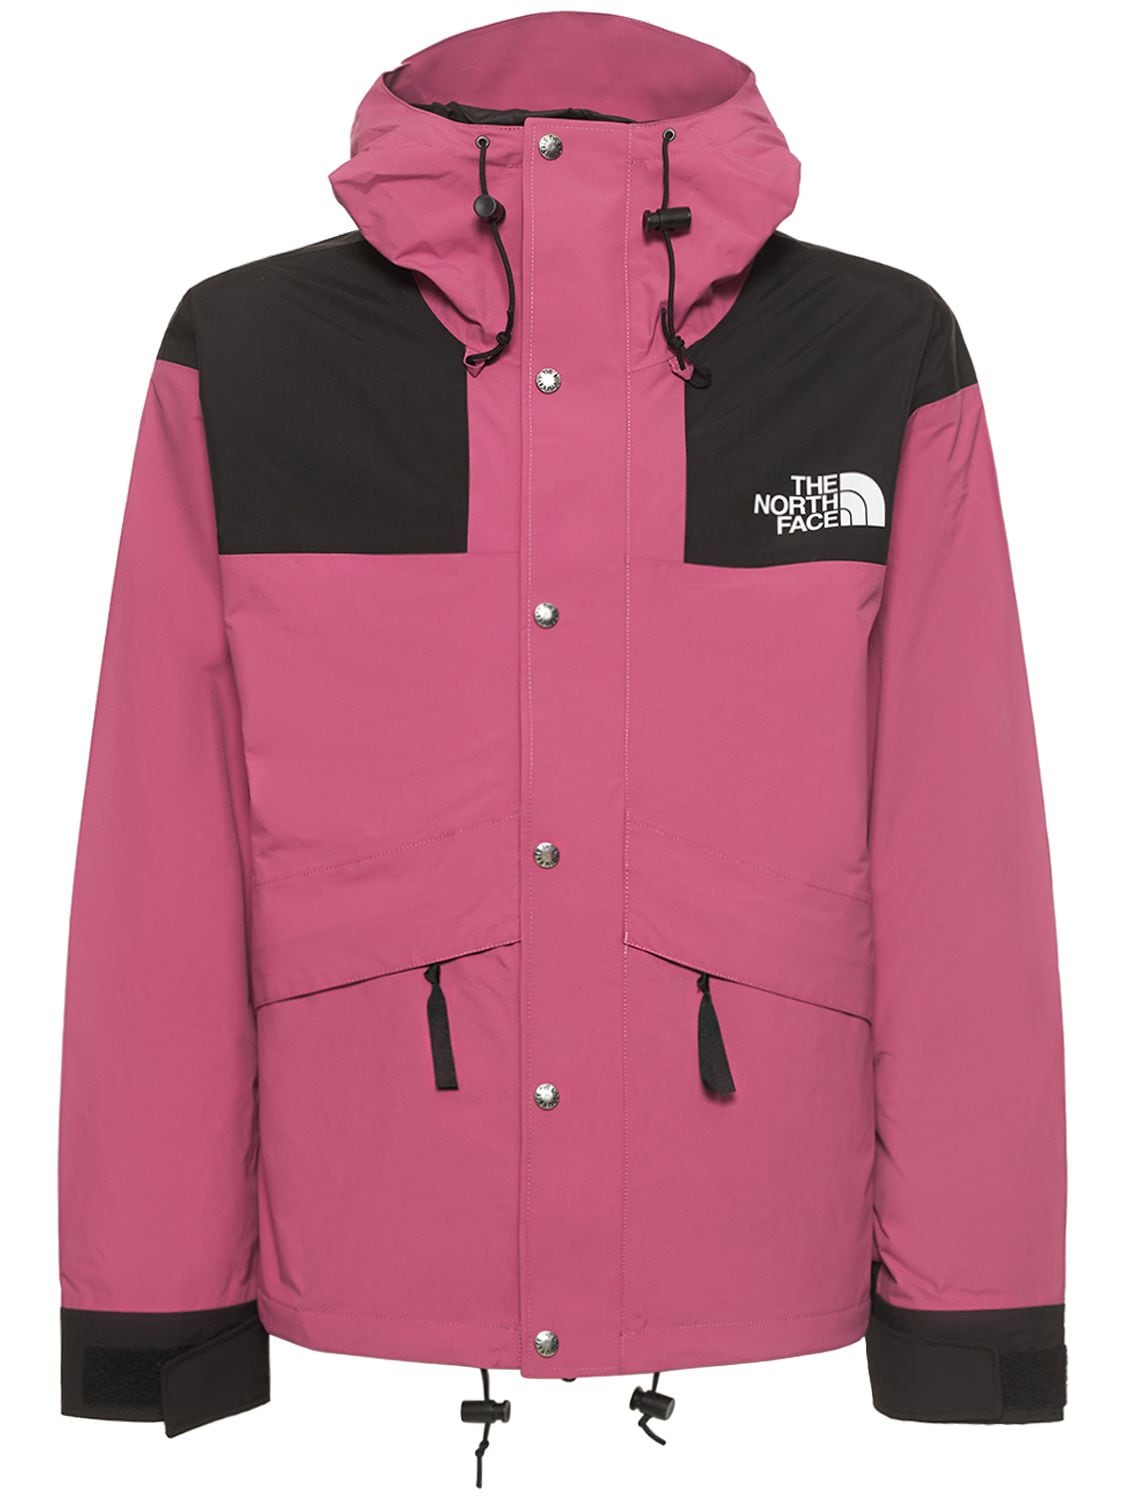 The North Face 86 Retro Mountain Jacket In Pink